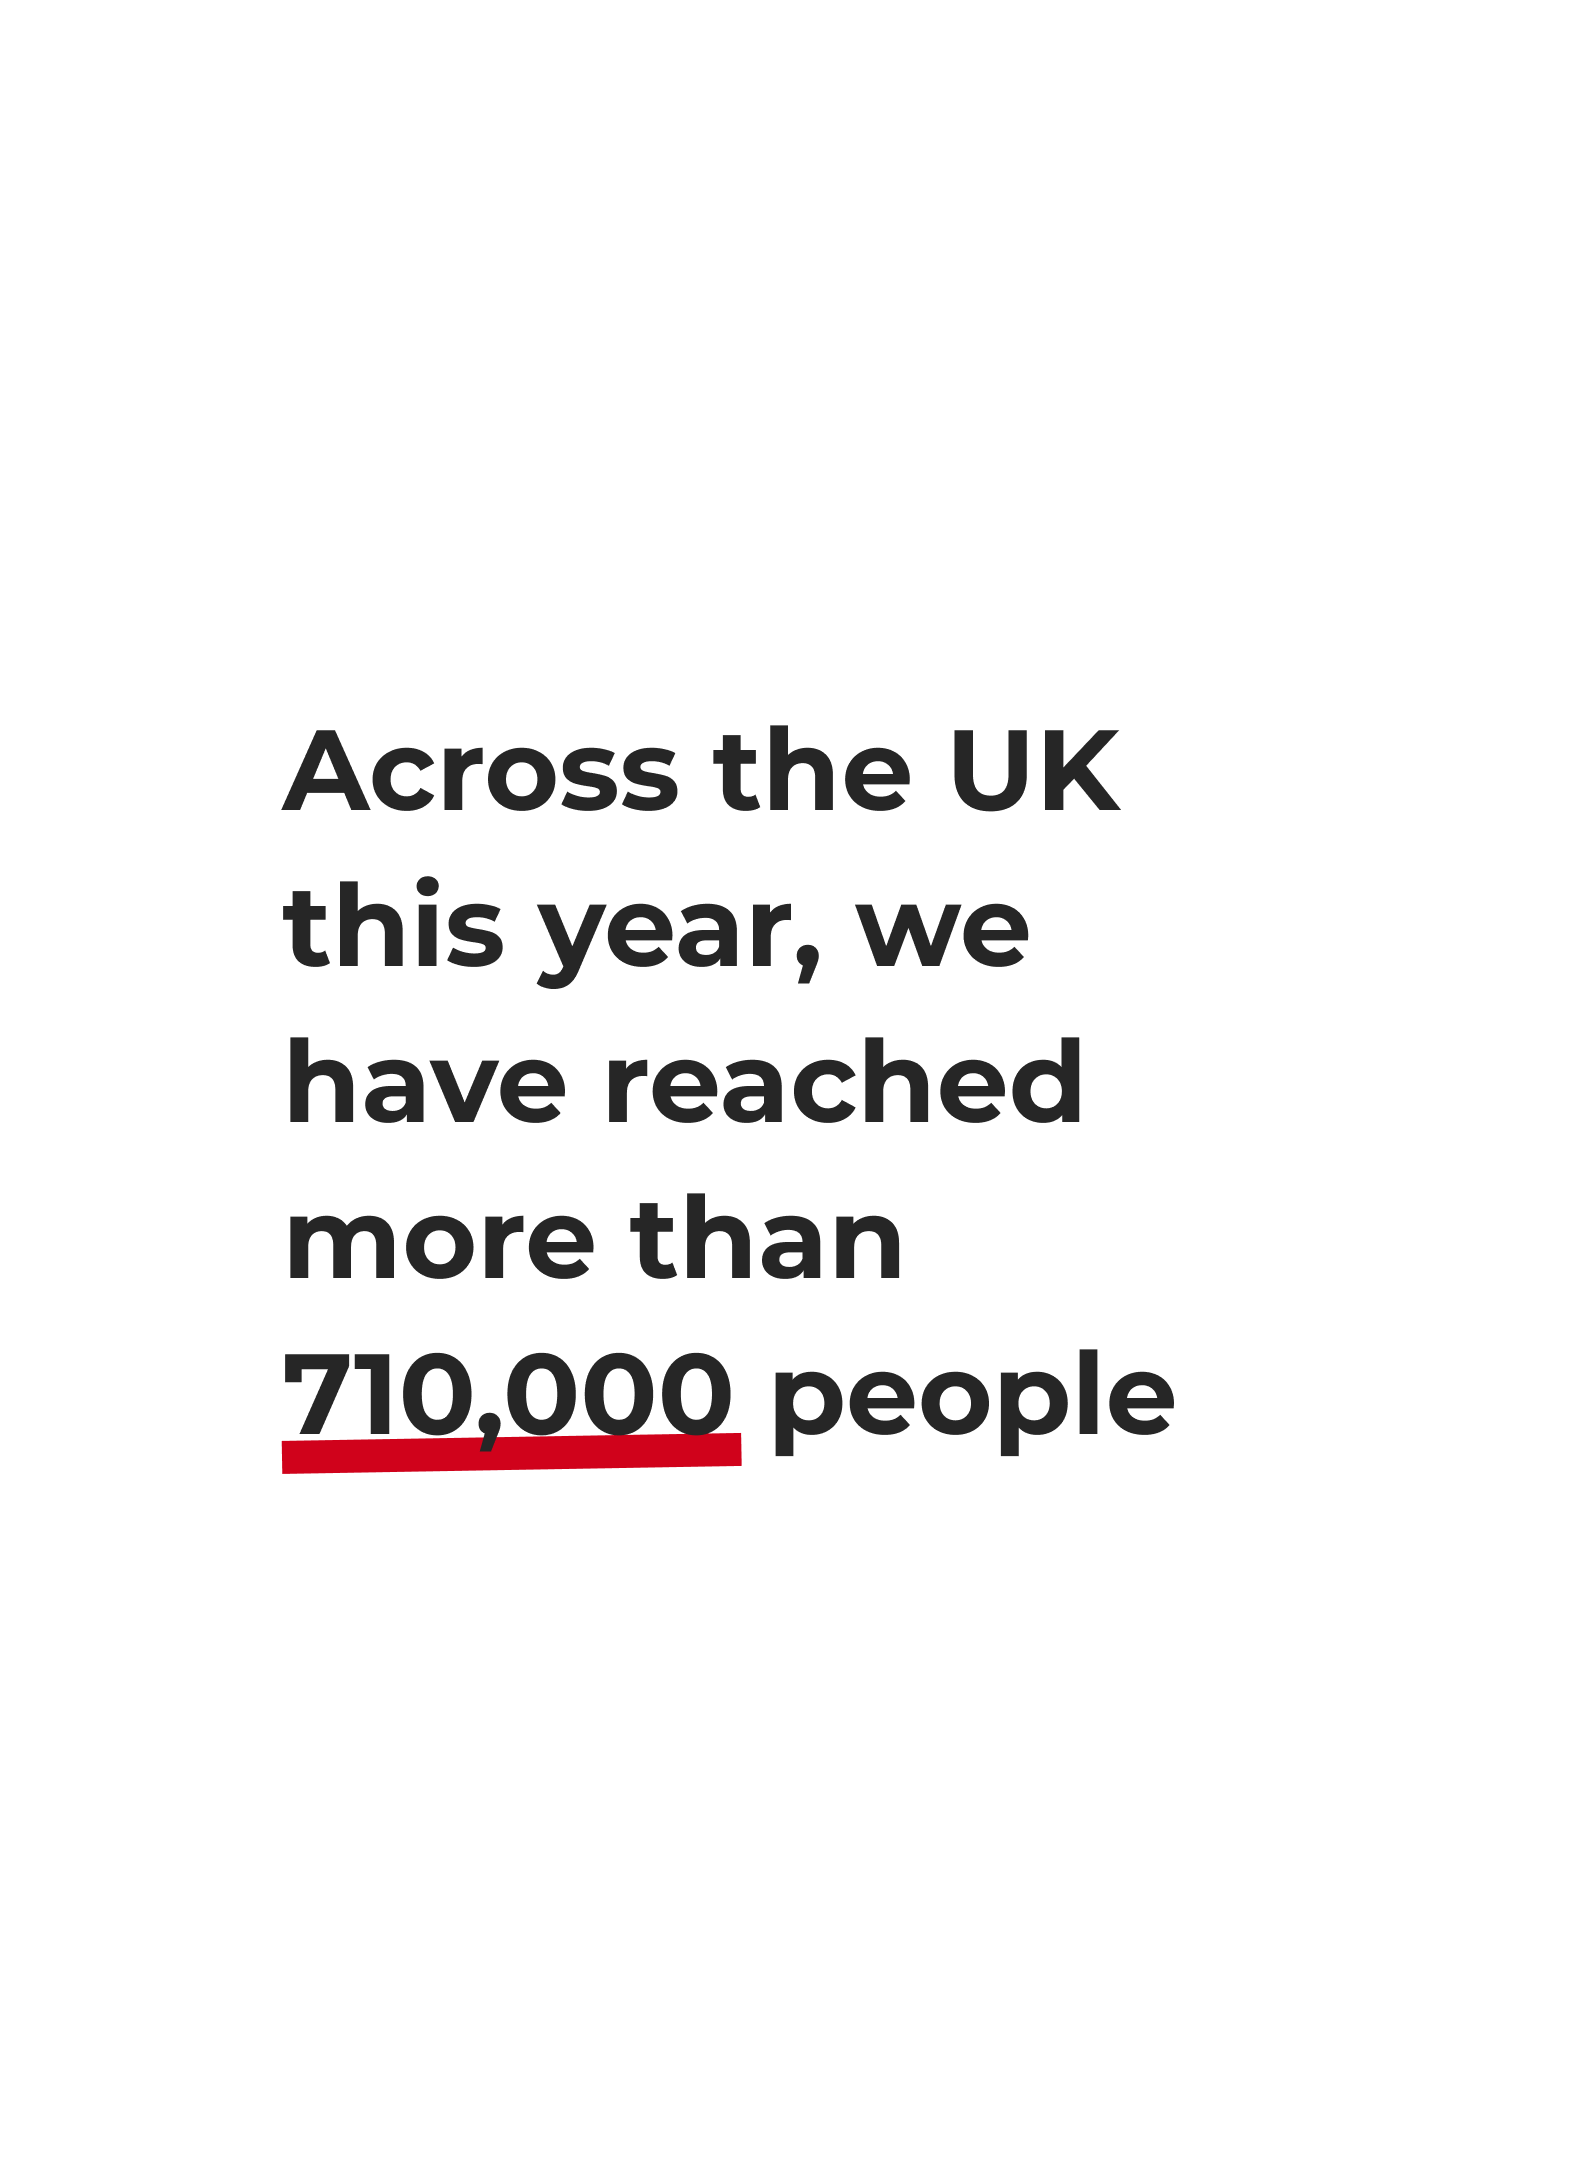 Graphic saying 'Across the UK this year, we have reached more than 710,000 people'